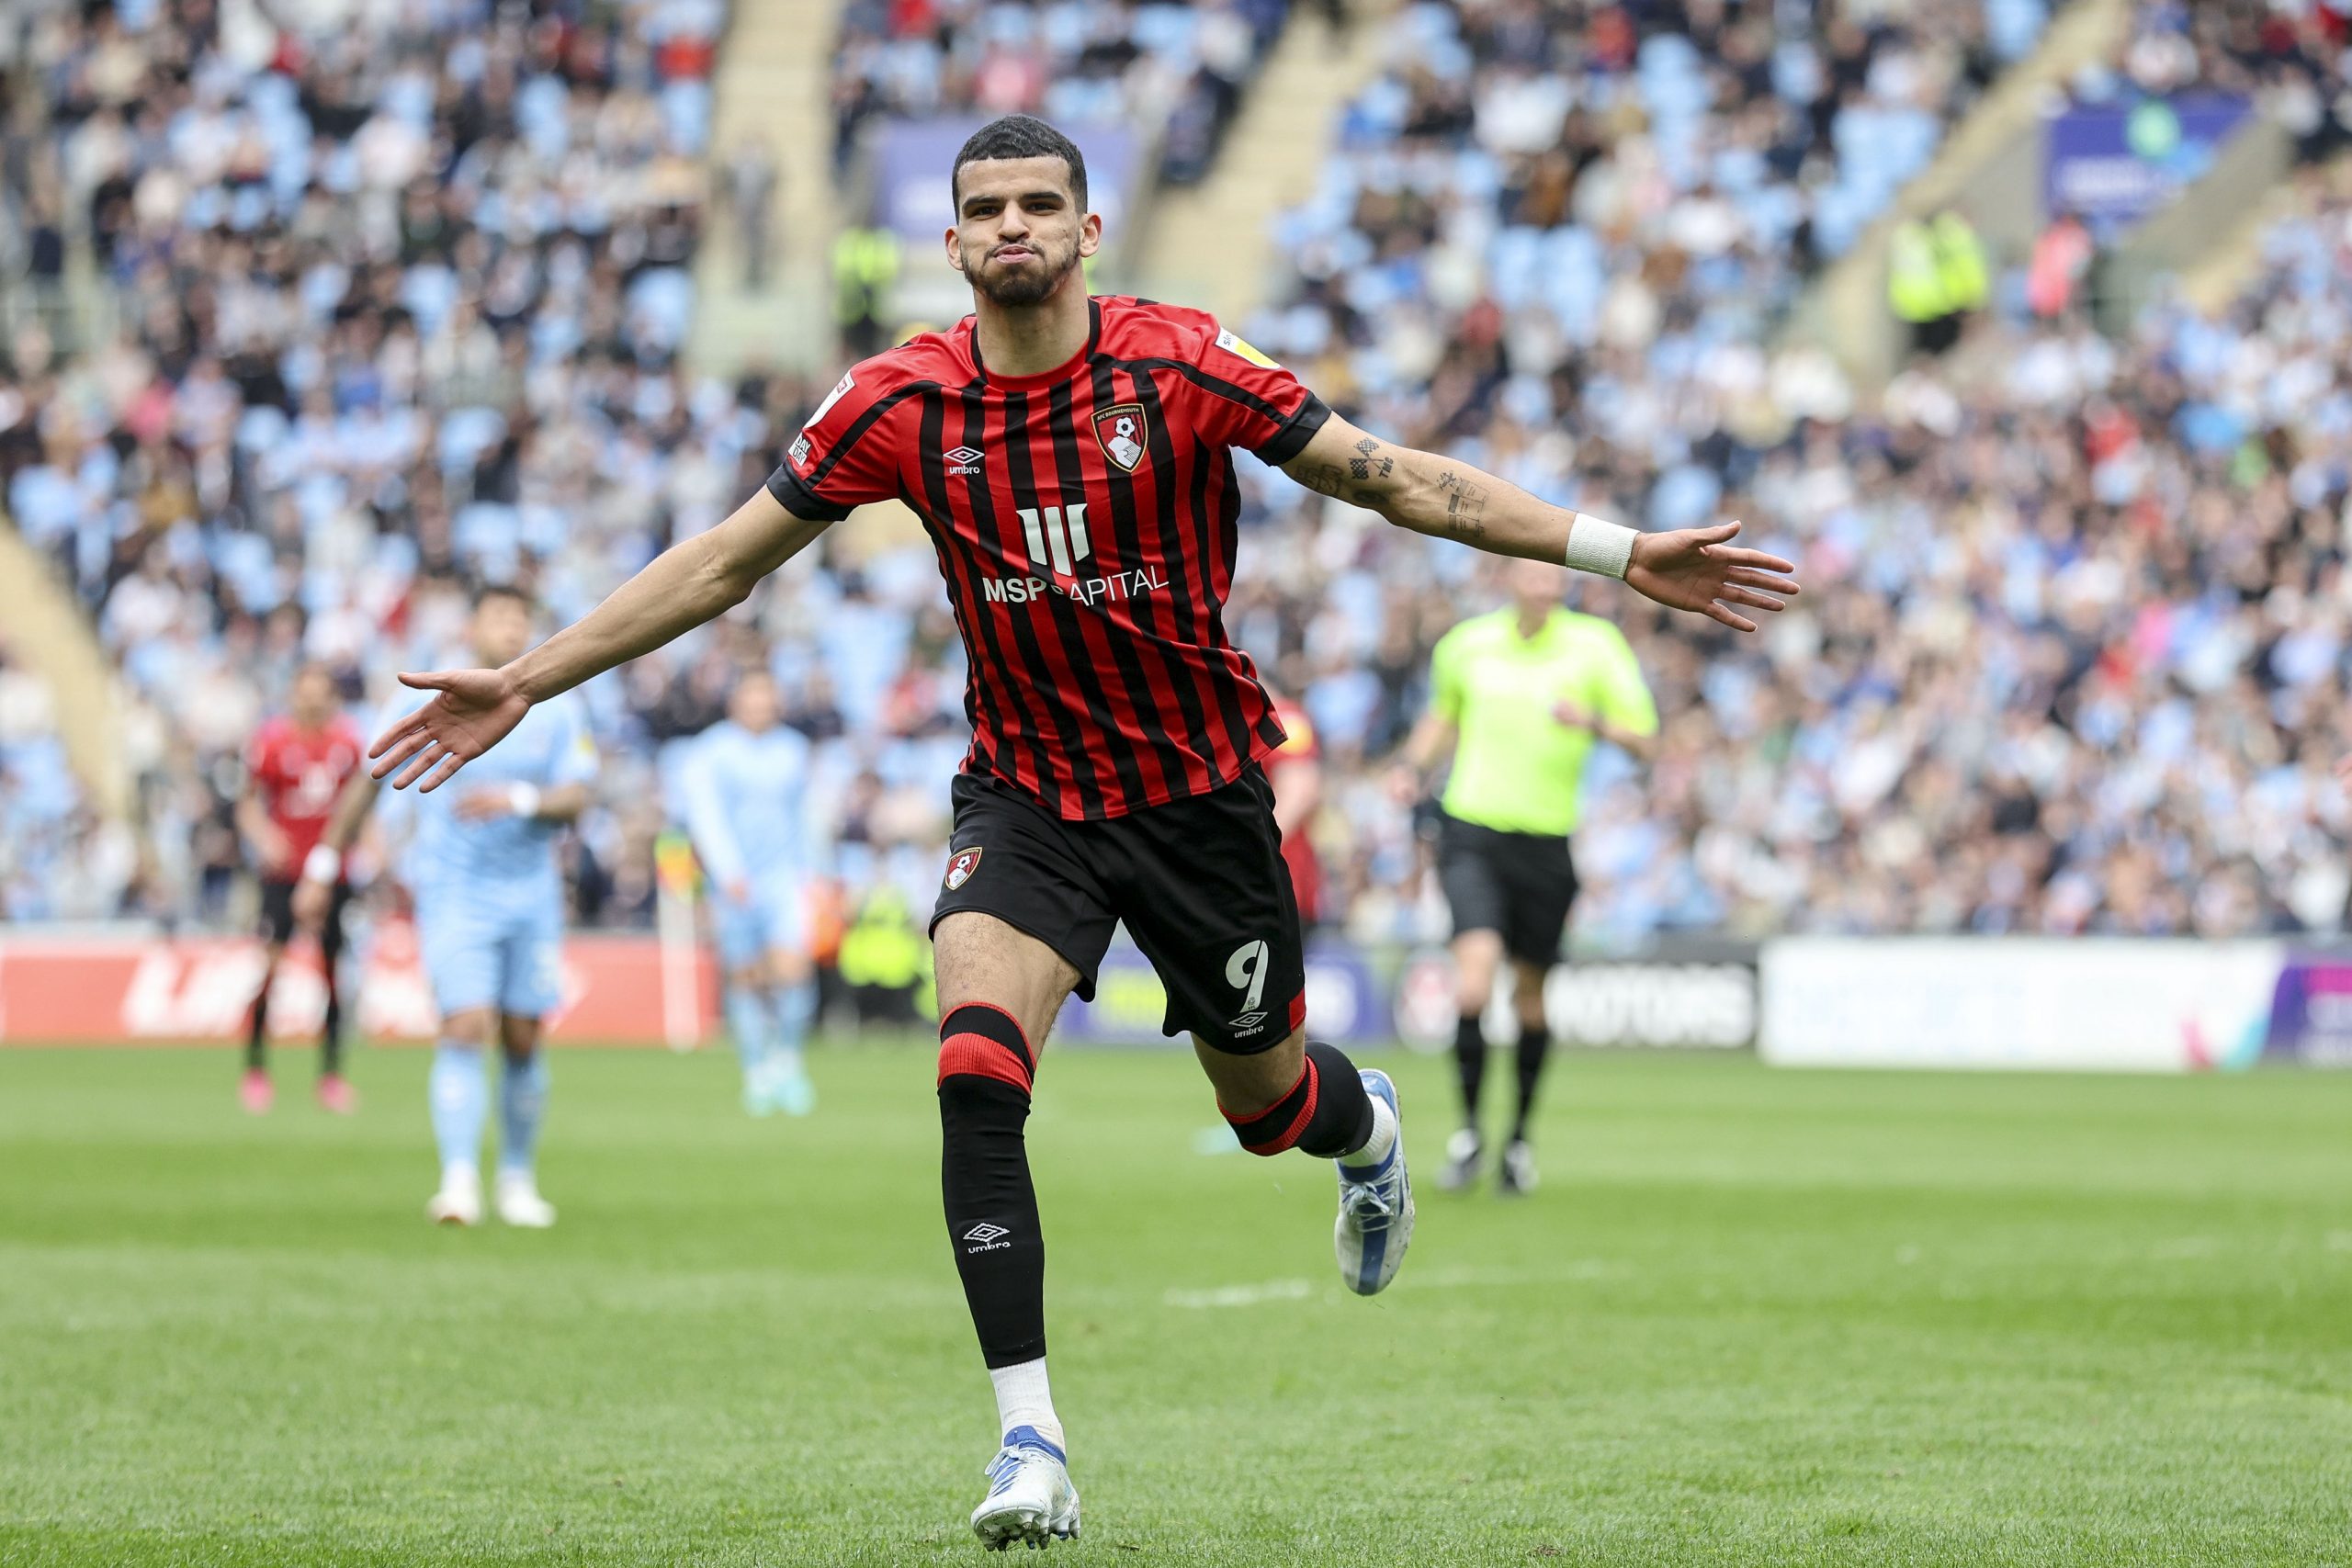 Newcastle Swoop For Bournemouth Star, Solanke